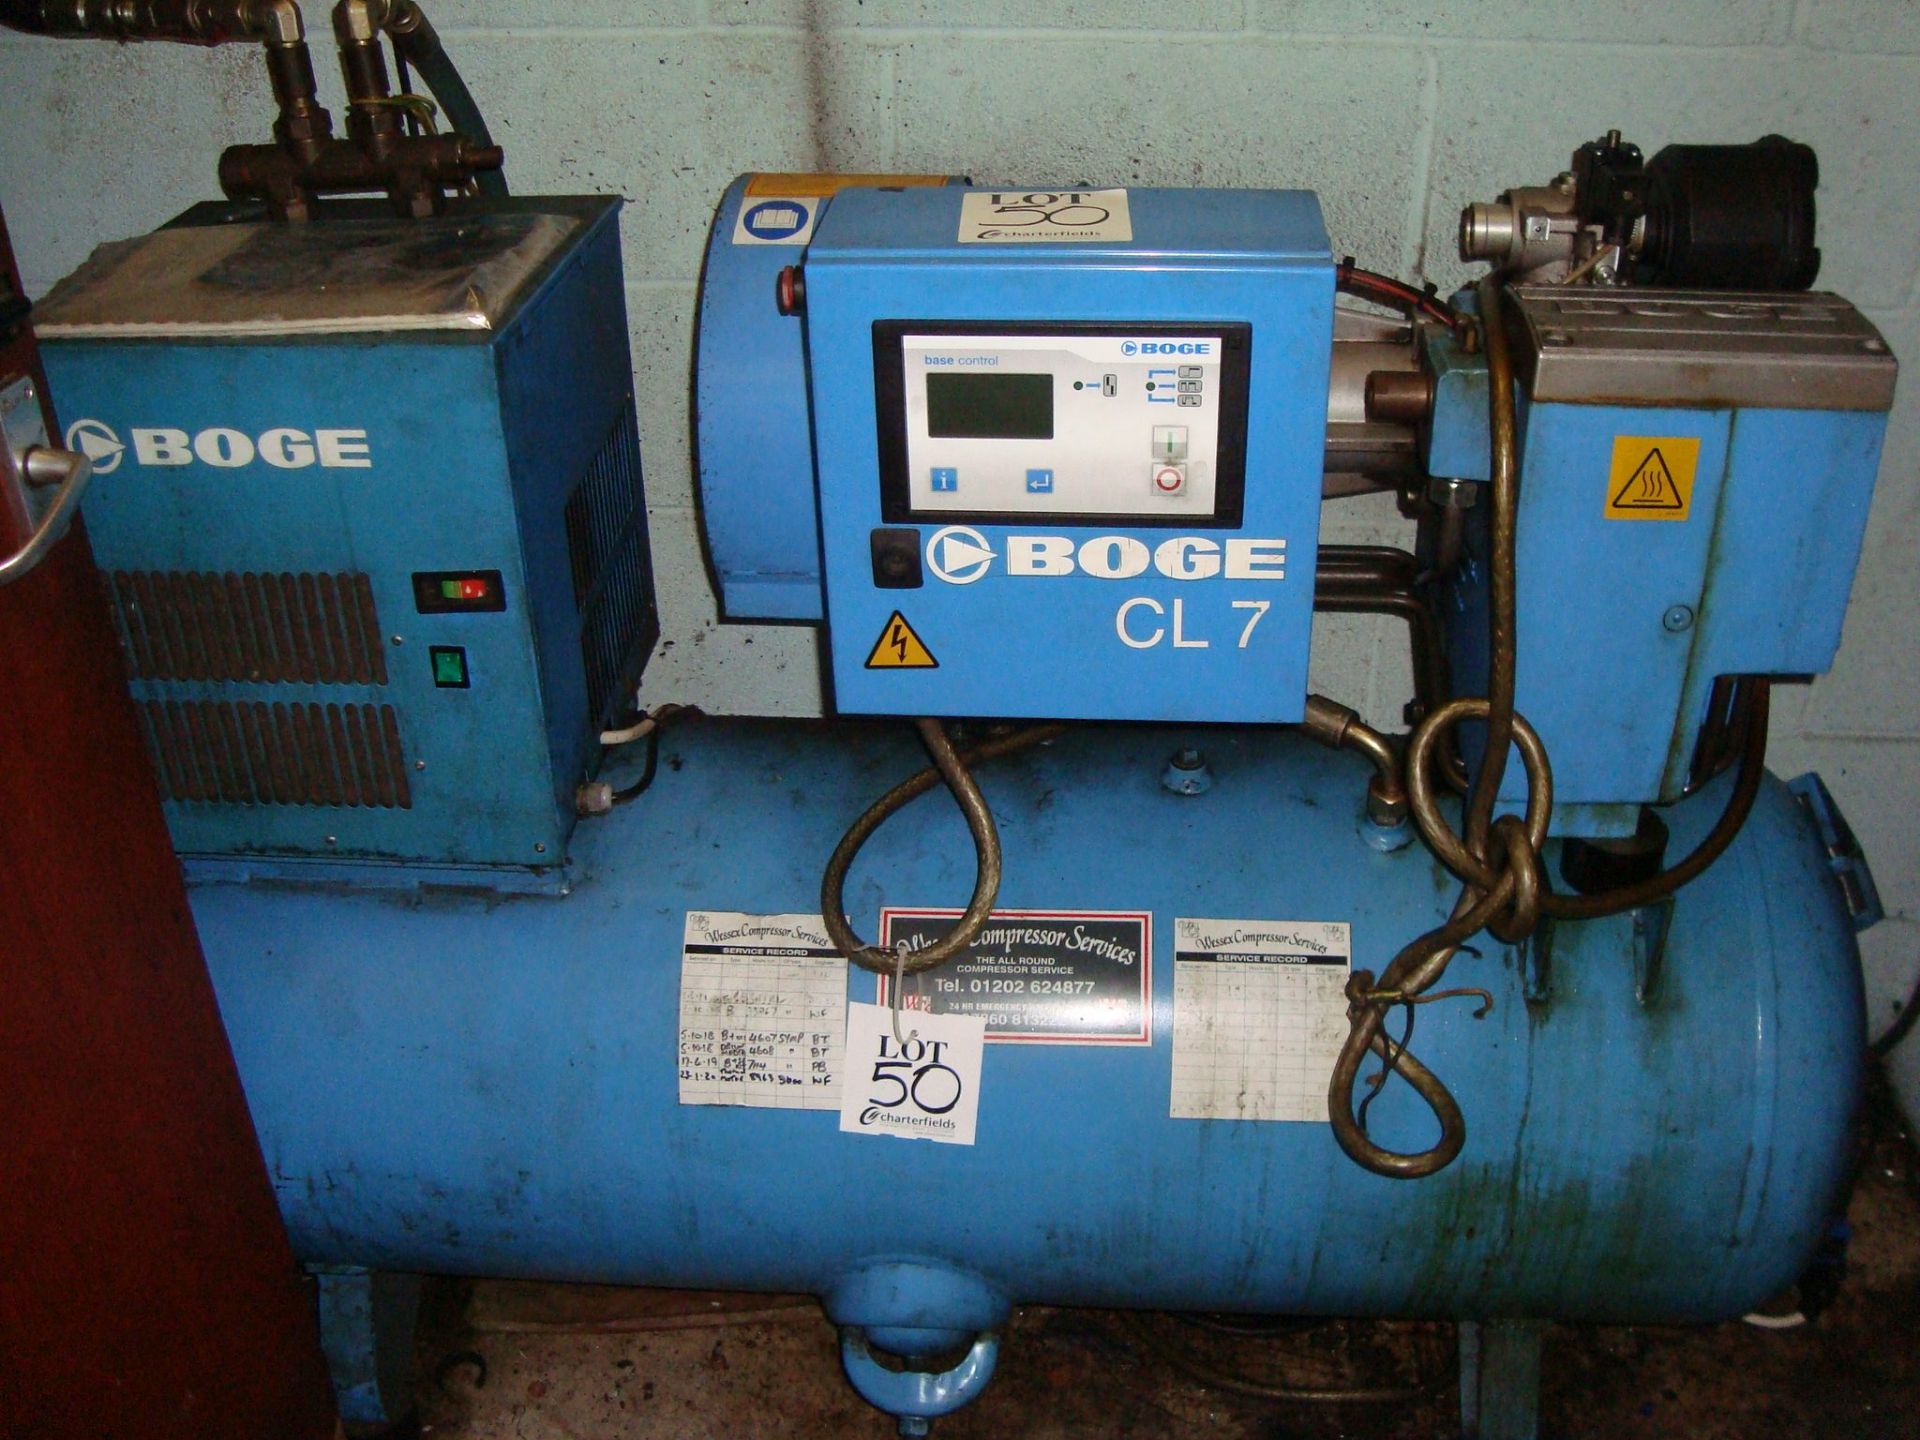 A Boge CL7 receiver mounted air compressor with dryer and fittings throughout Serial number